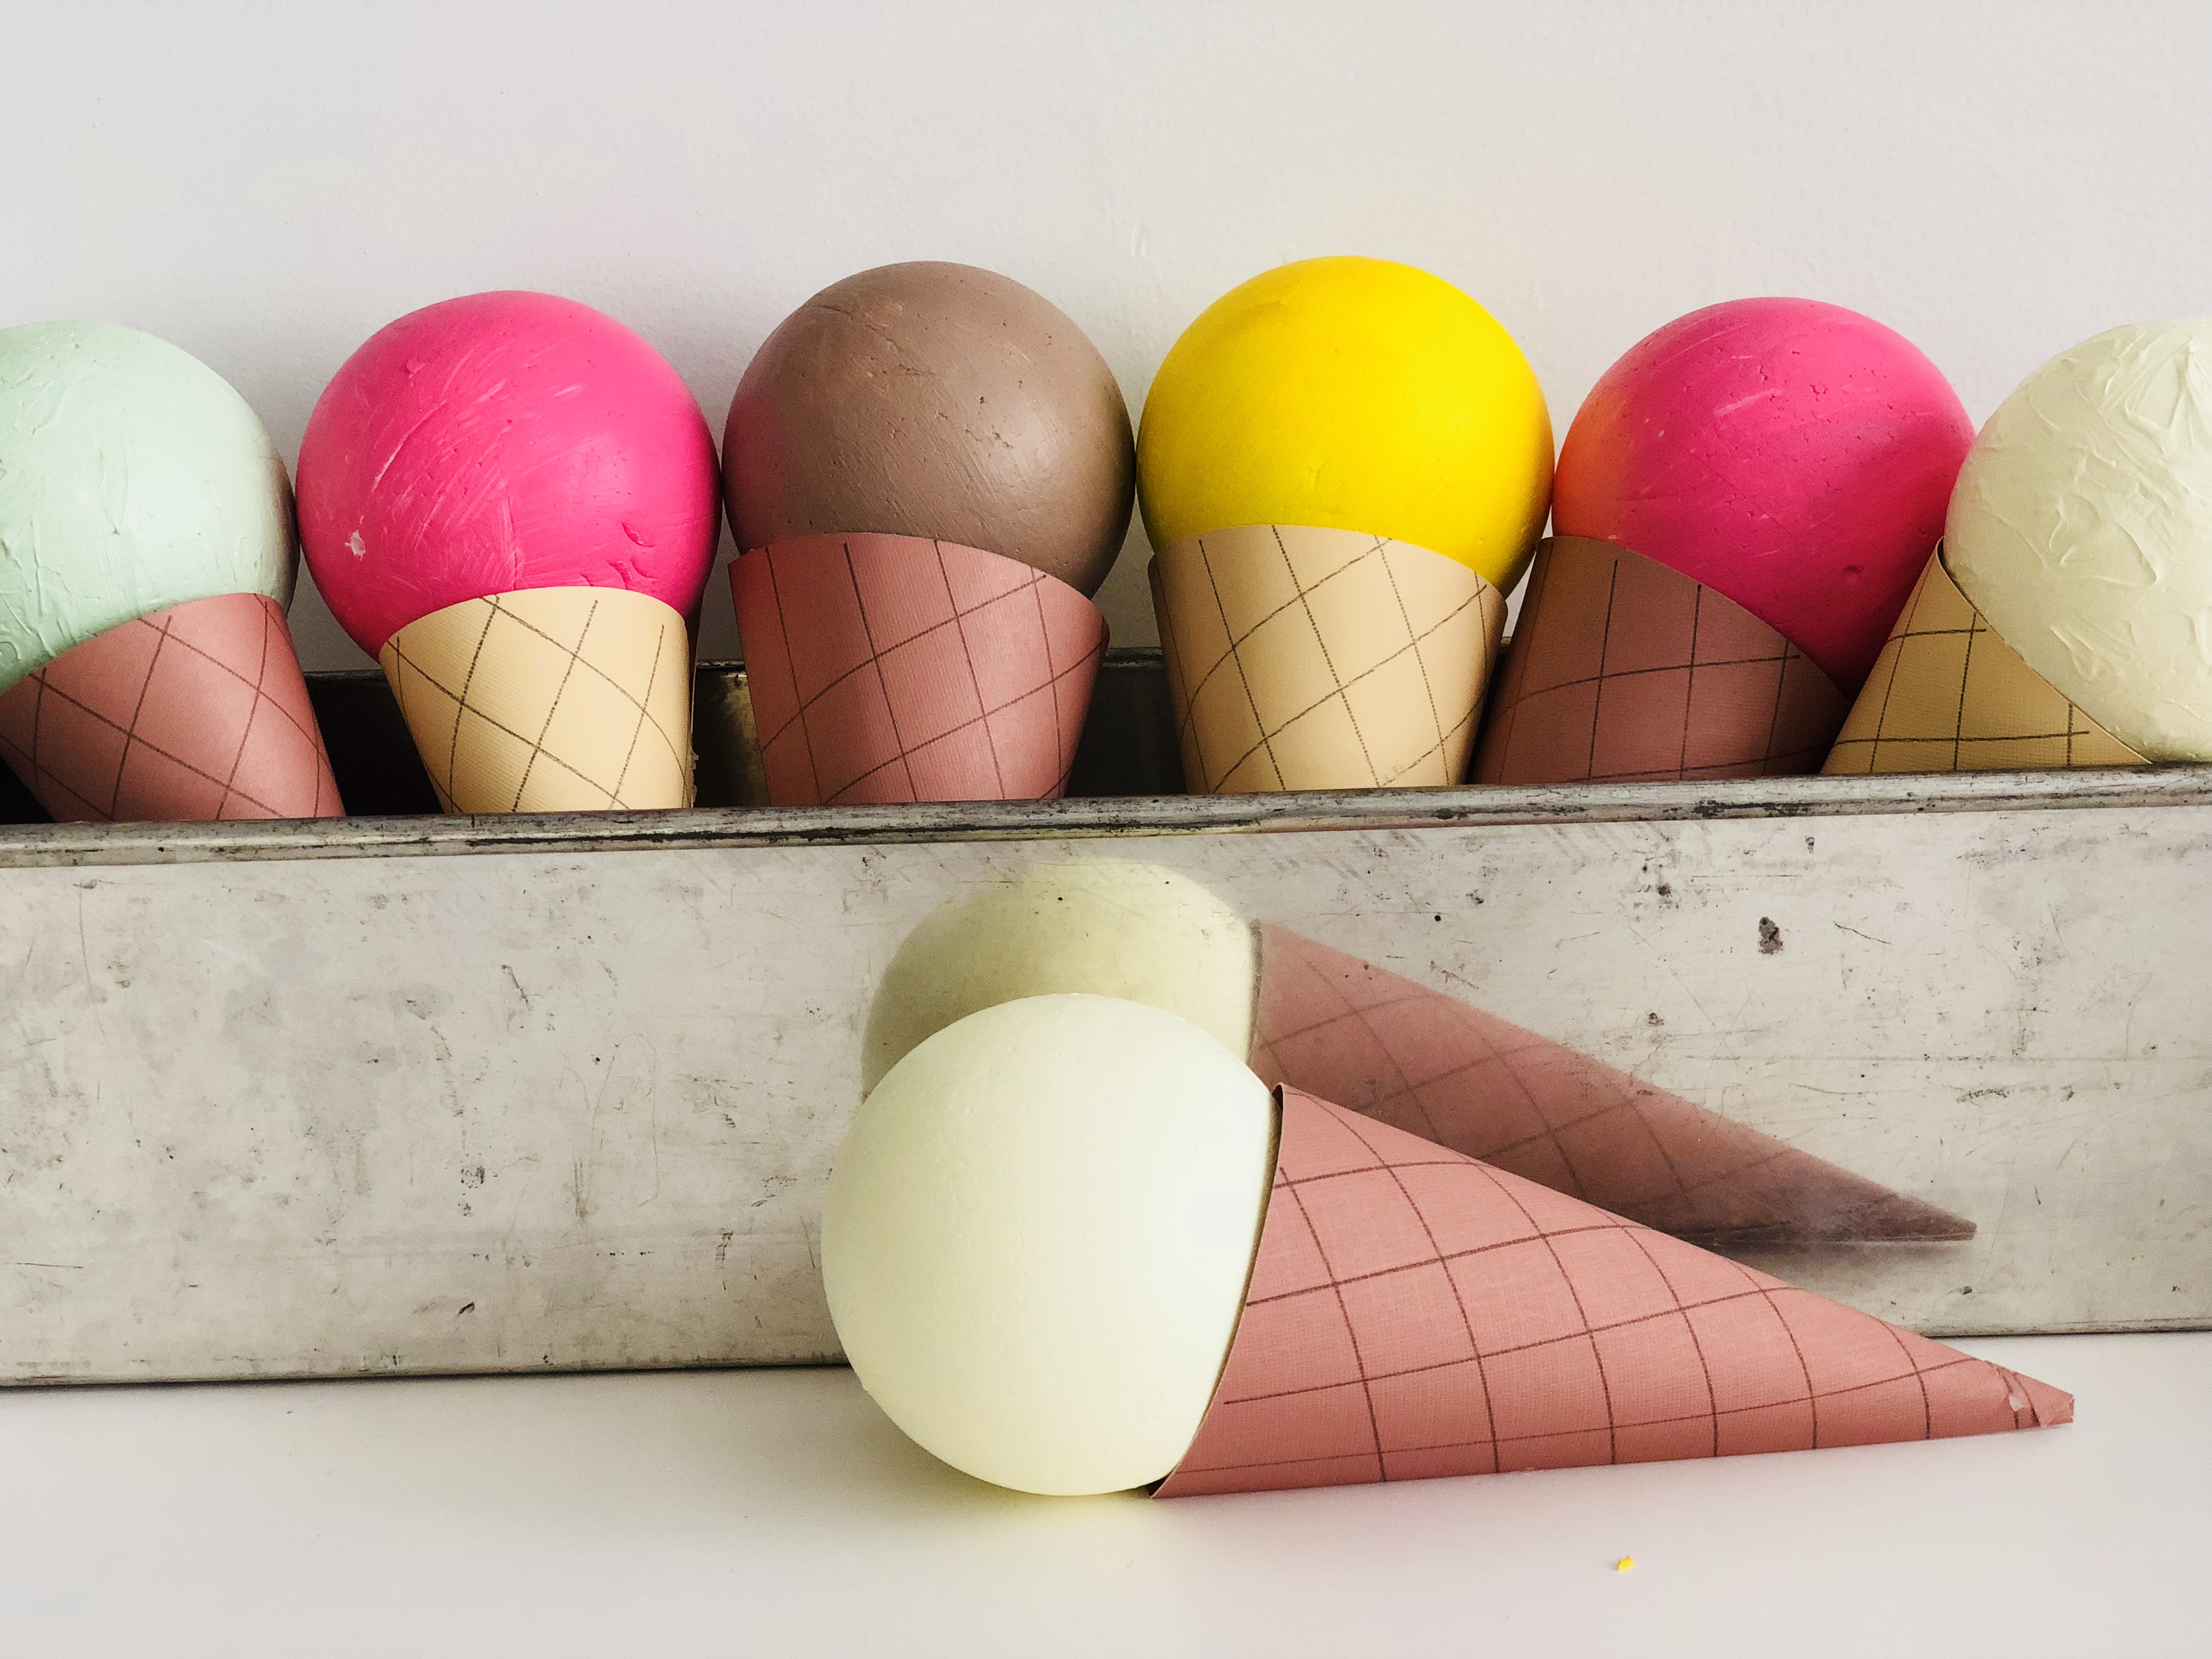 Styrofoam ice cream on card stock cones are fun for kids. One of our kids crafts idea for the summer.